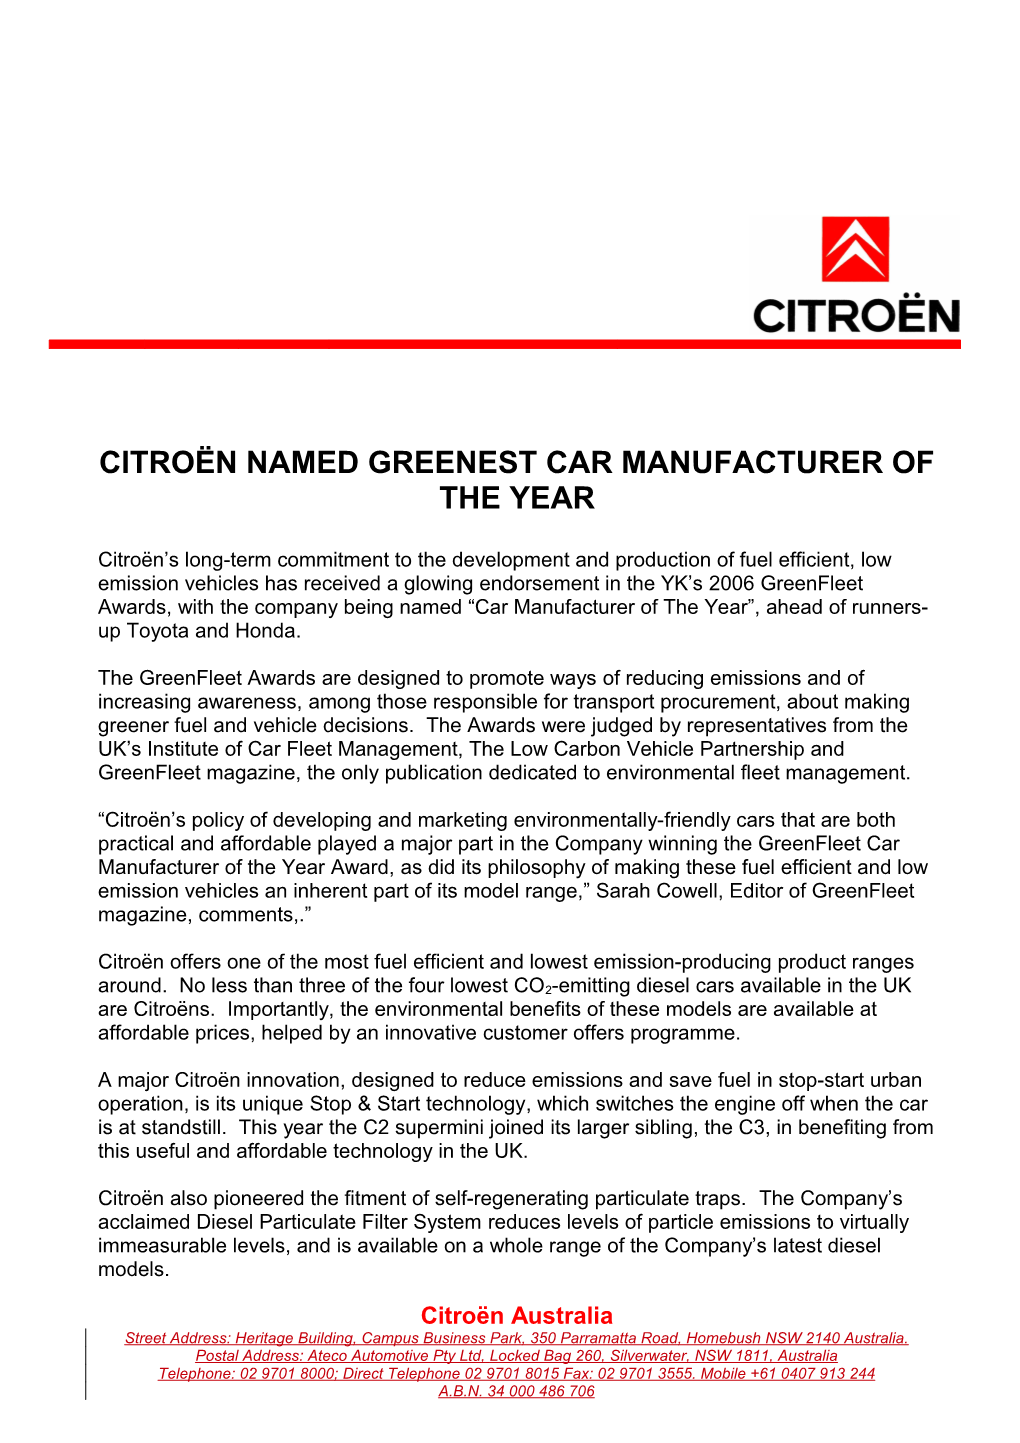 Citroën Named Greenestcar Manufacturer of the Year